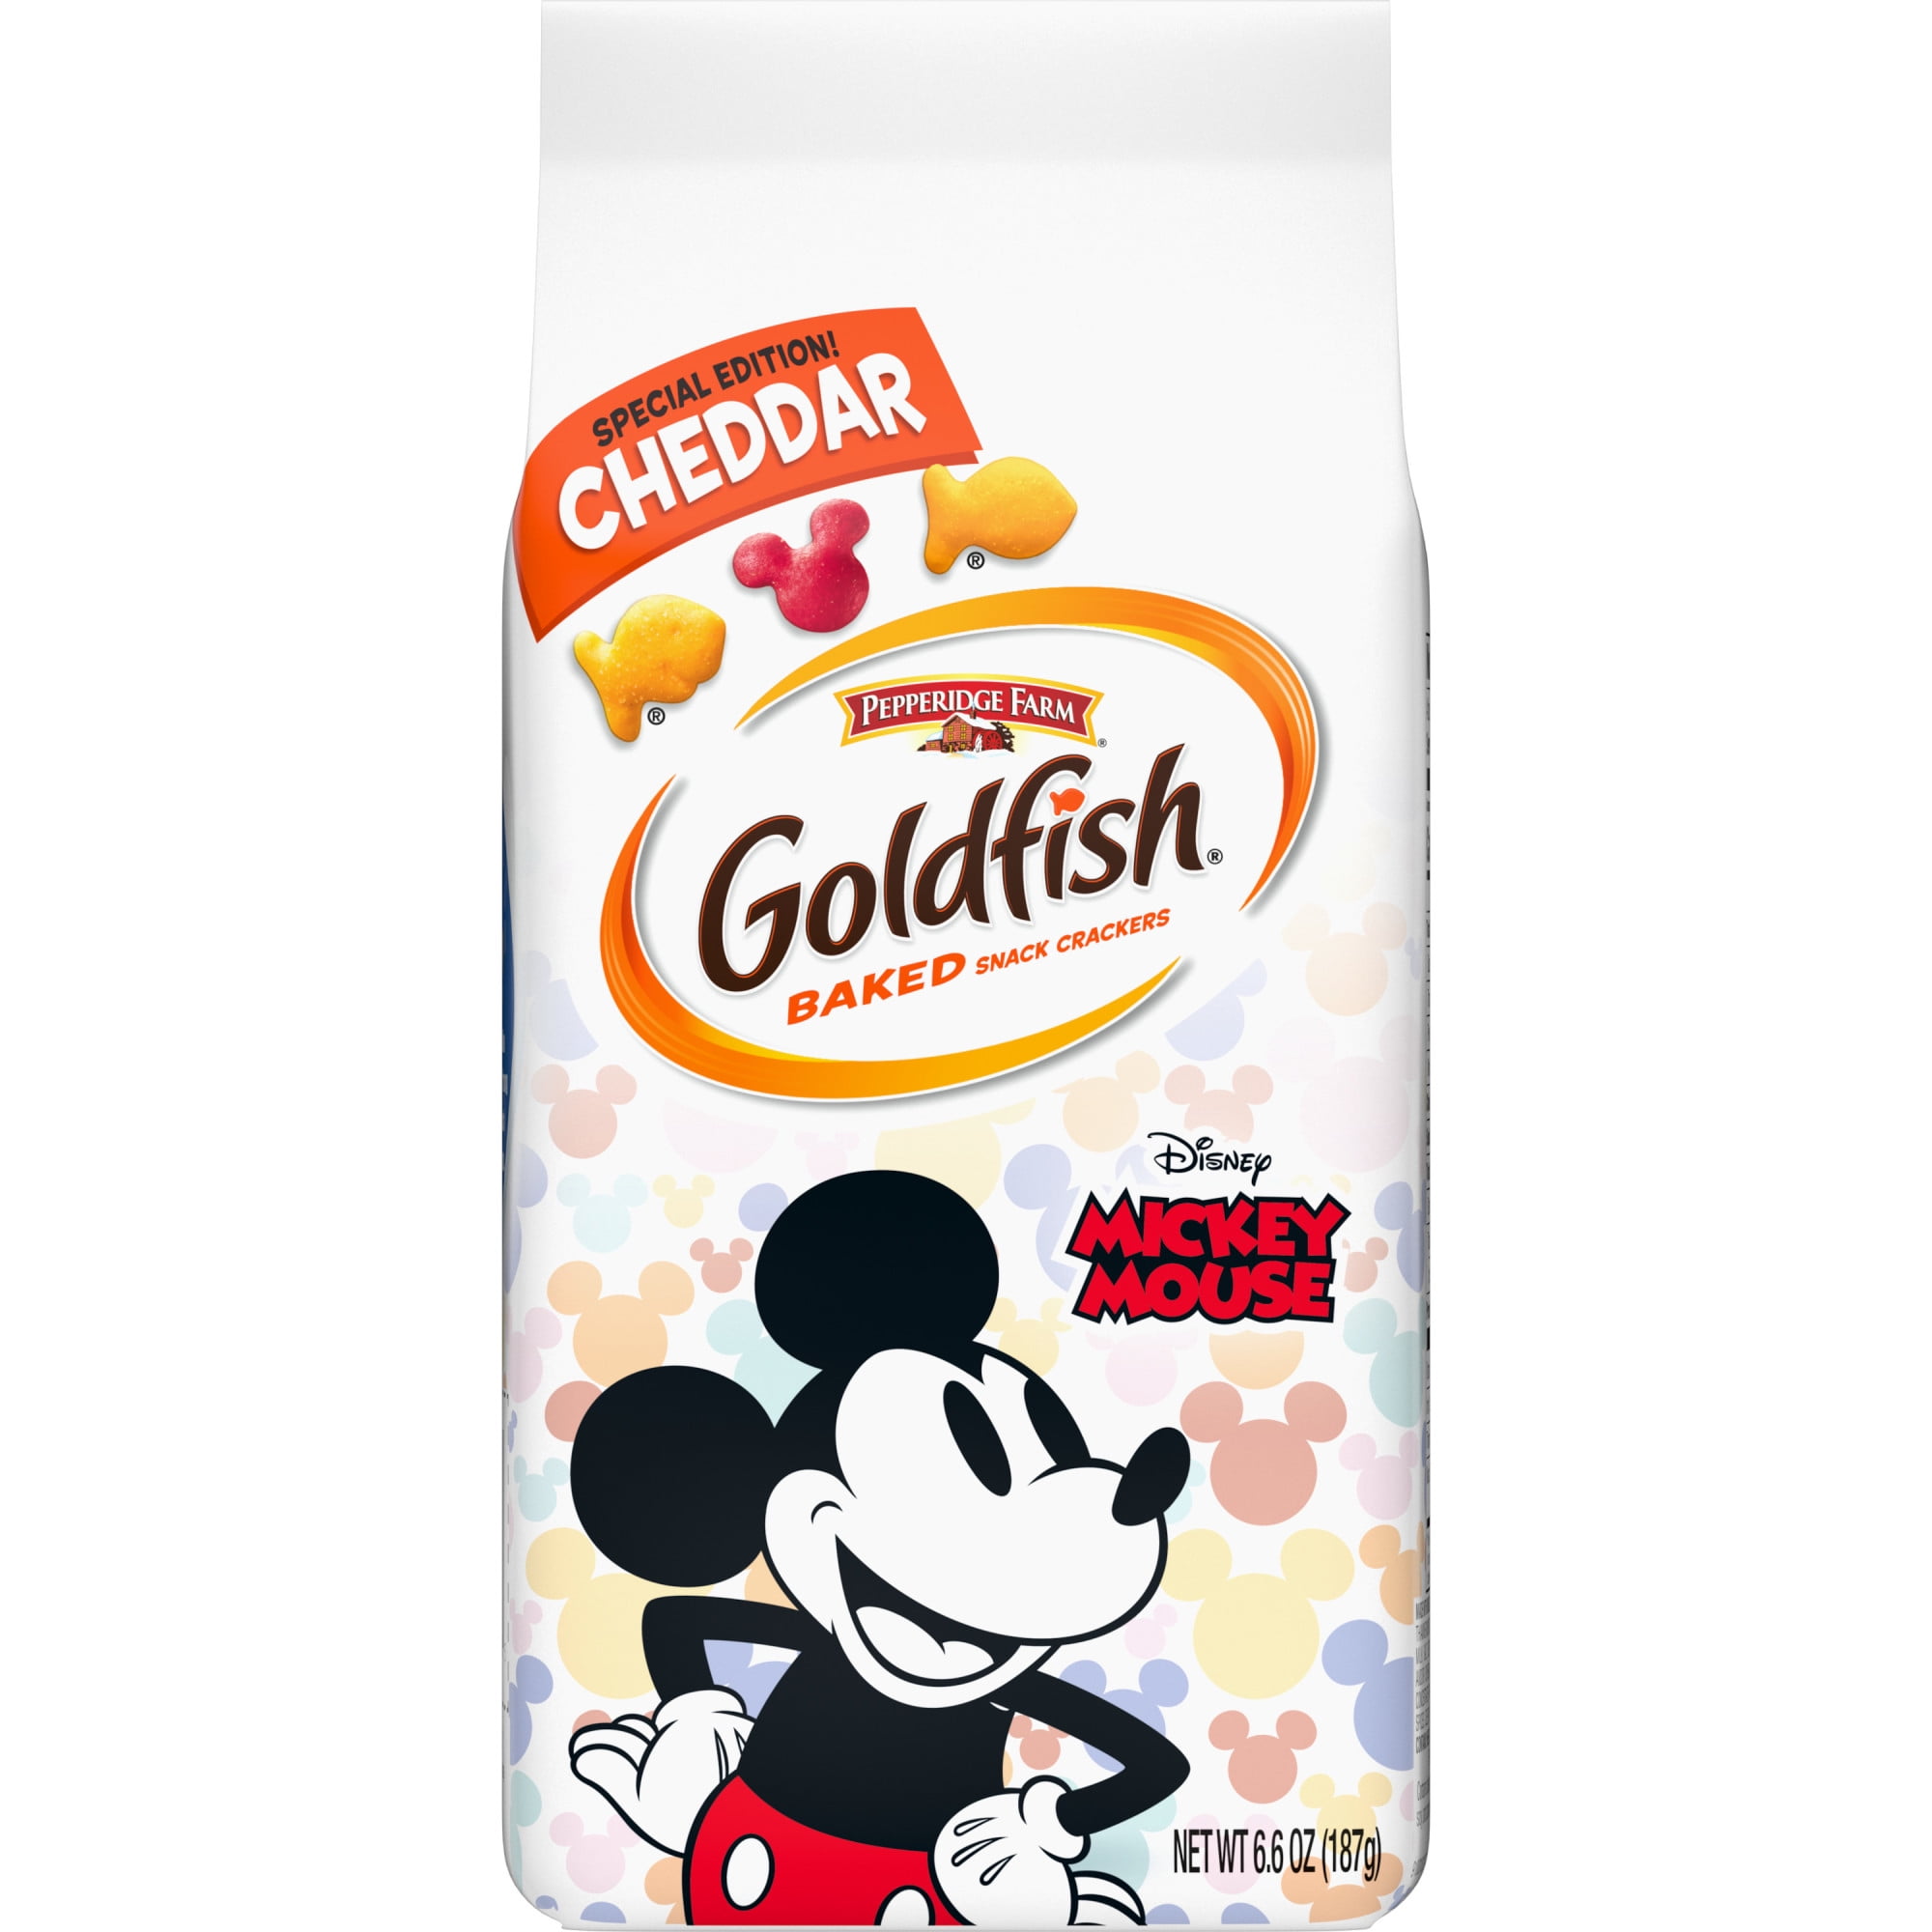 Goldfish Disney Mickey Mouse Cheddar Crackers, Snack Crackers, 6.6 oz bag